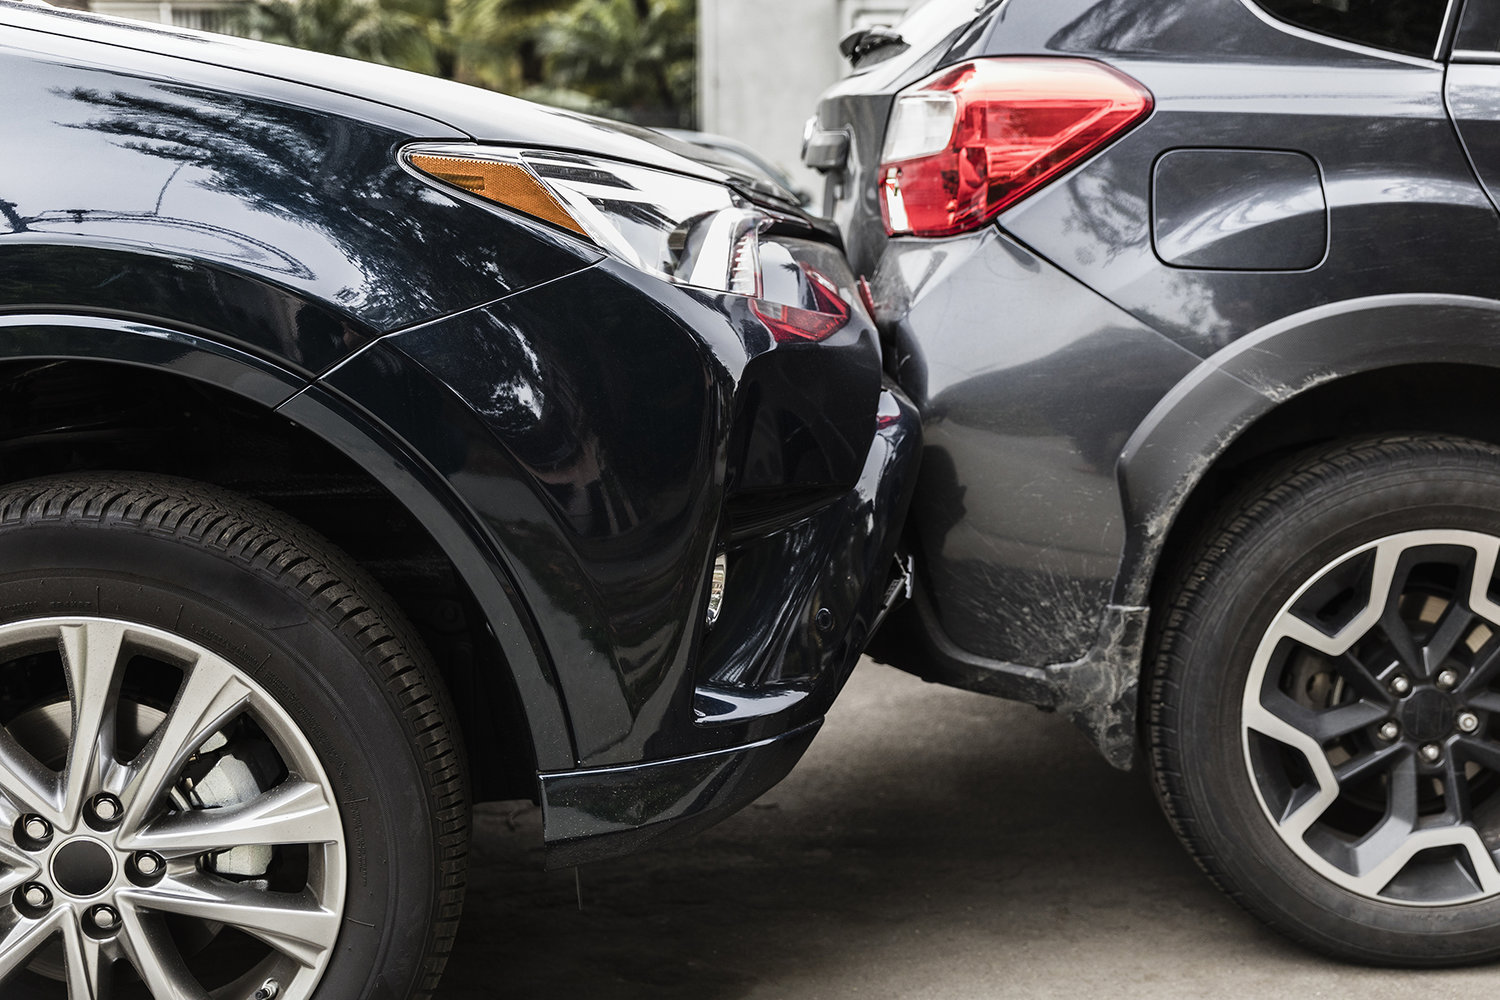 Does Car Insurance Cover Body Damage